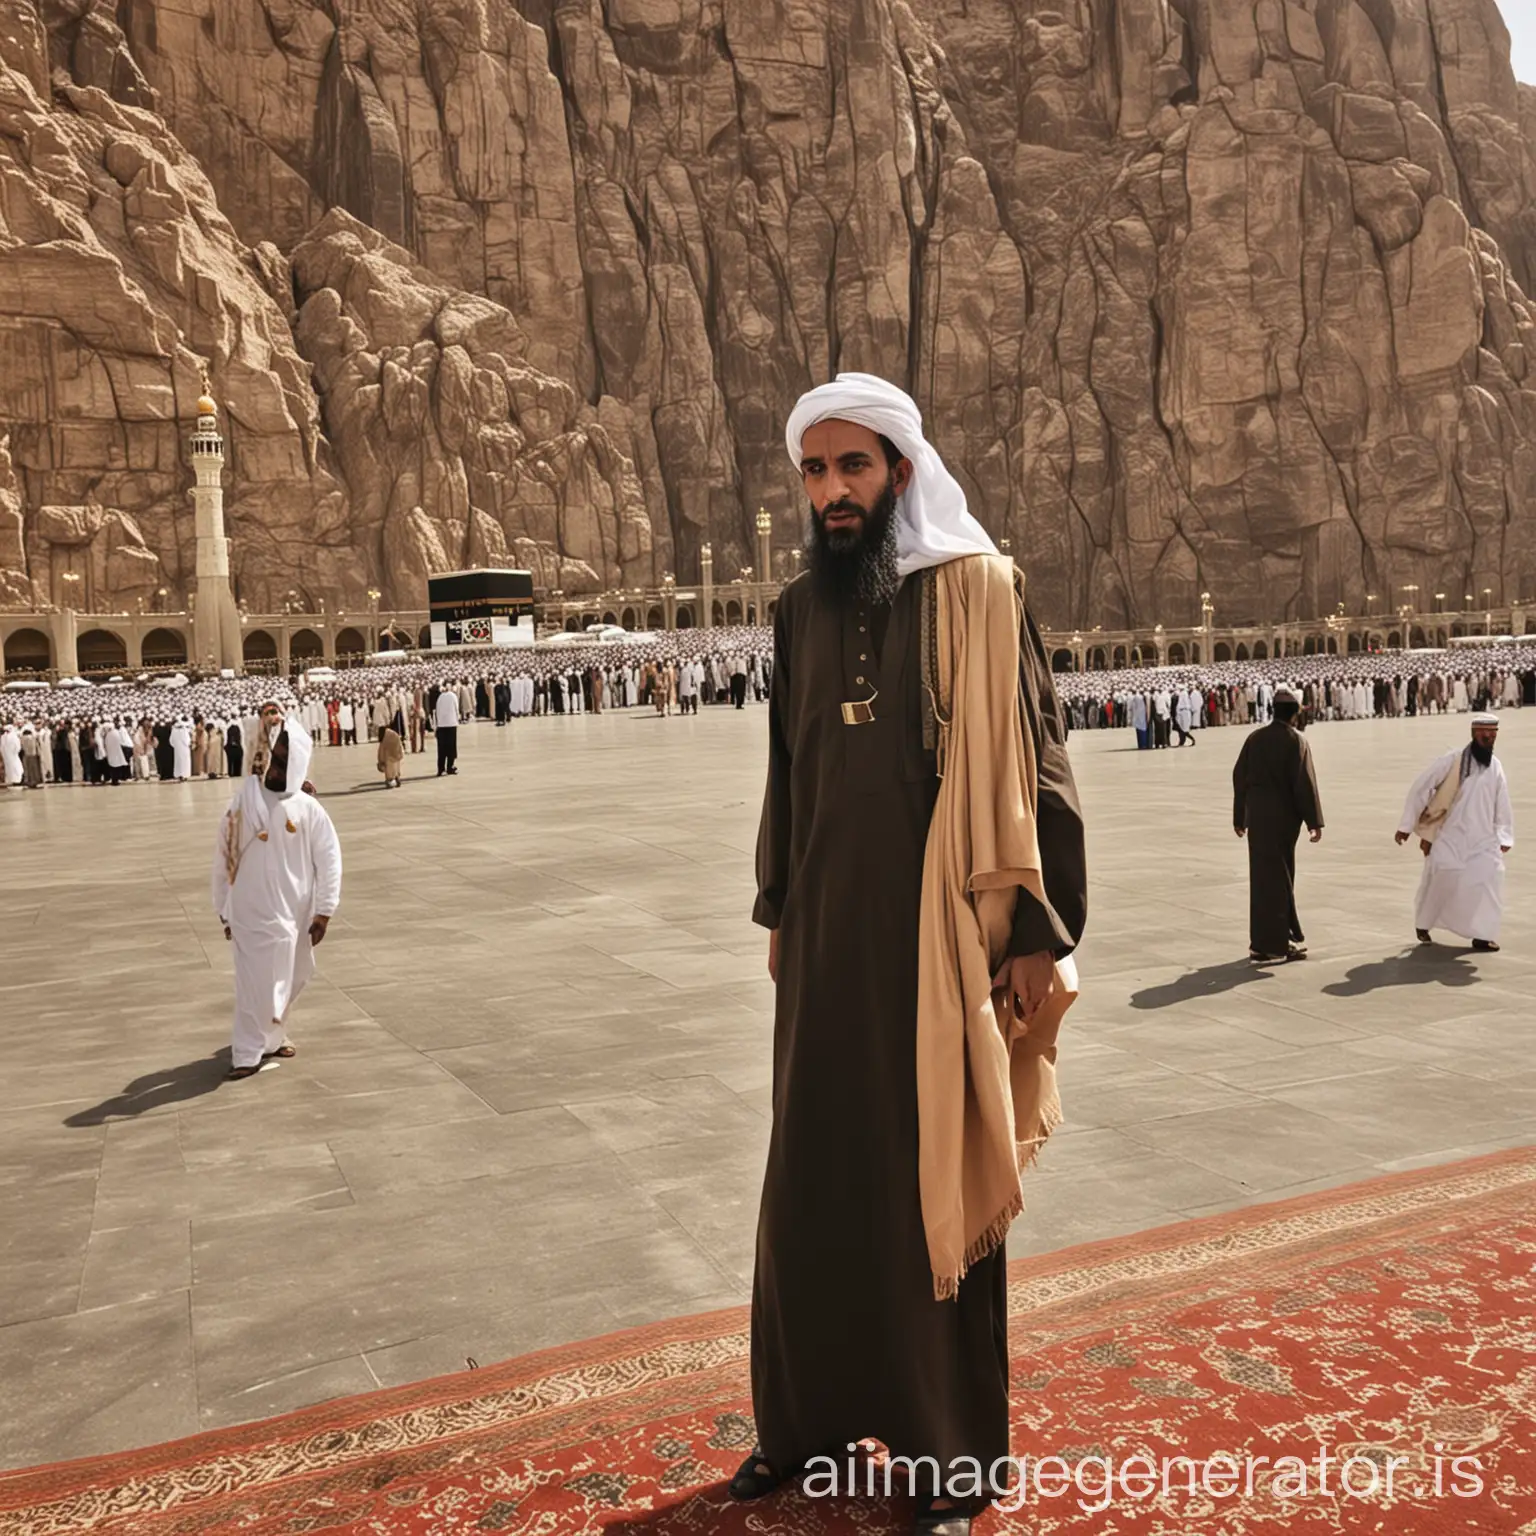 After some time, Prophet Ibrahim (ʿalayhi-s-salāmū) traveled to Makkah to visit his son once again but did not find him.